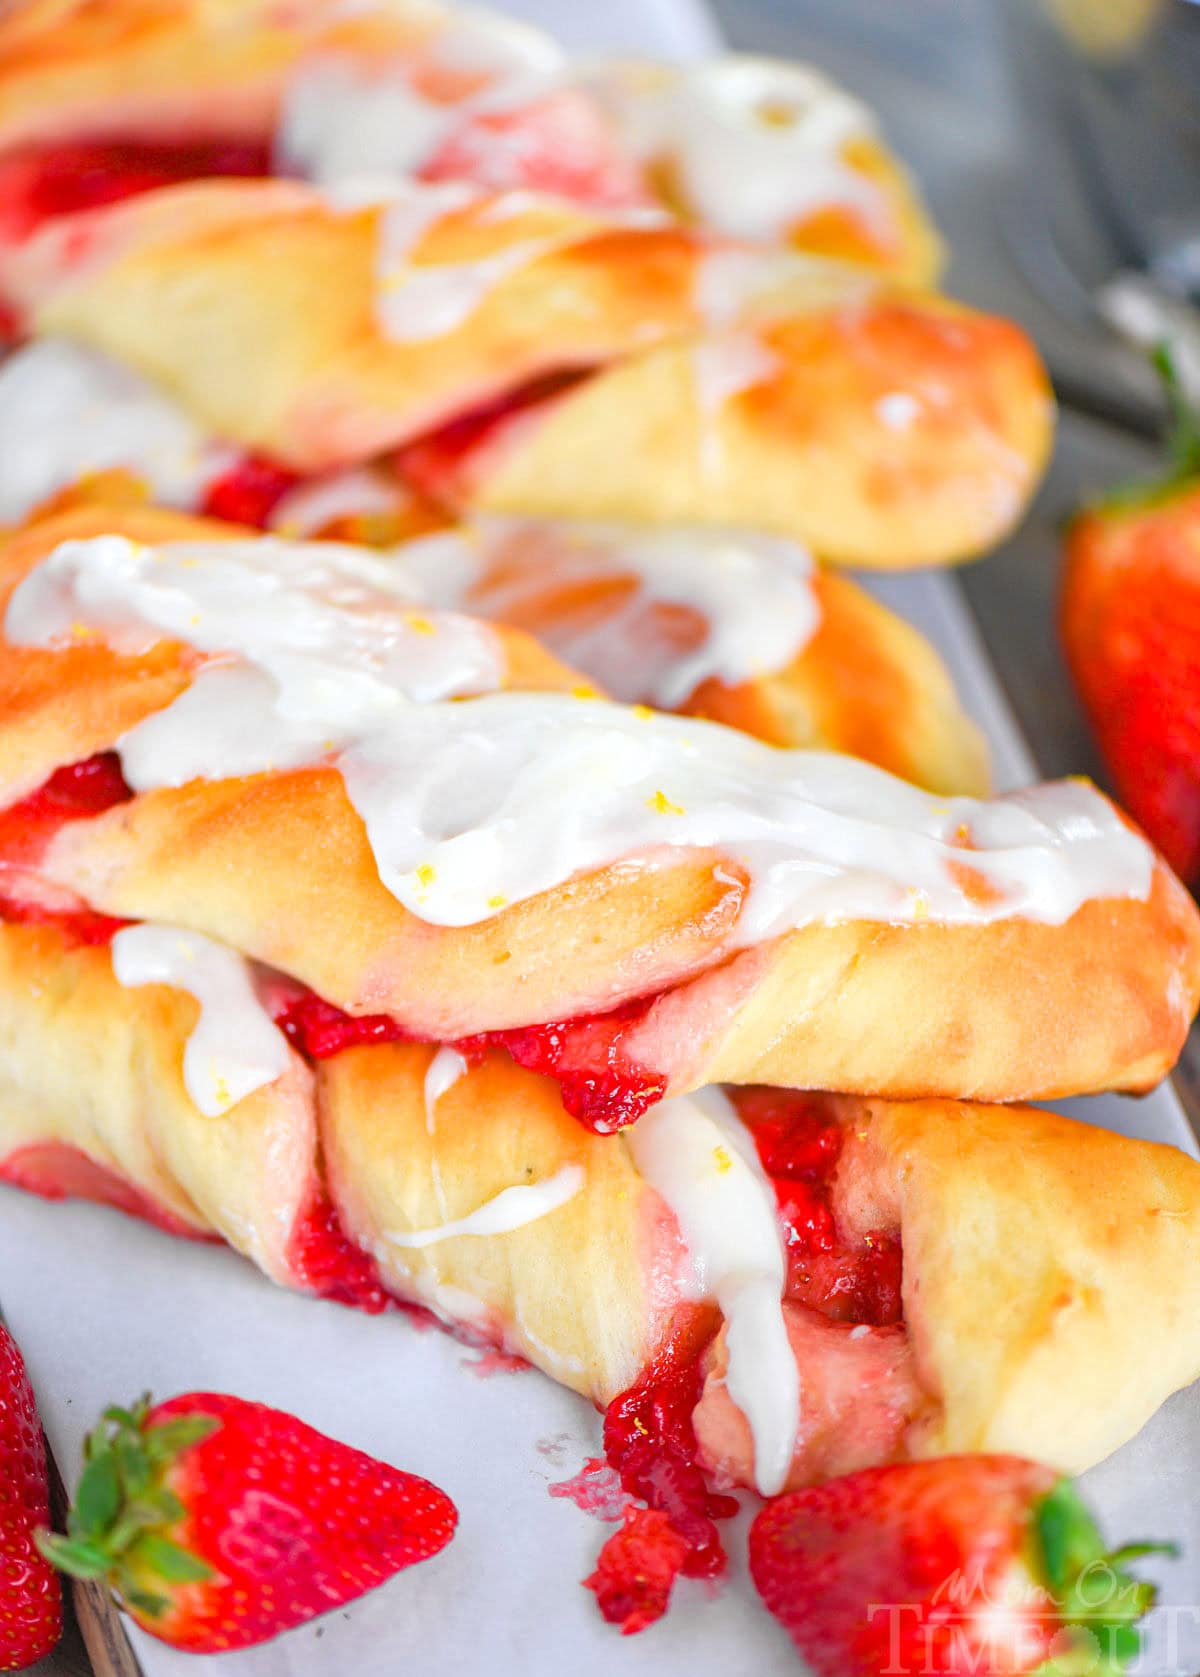 Two strawberry twists stacked on top each other with strawberries placed next to it.